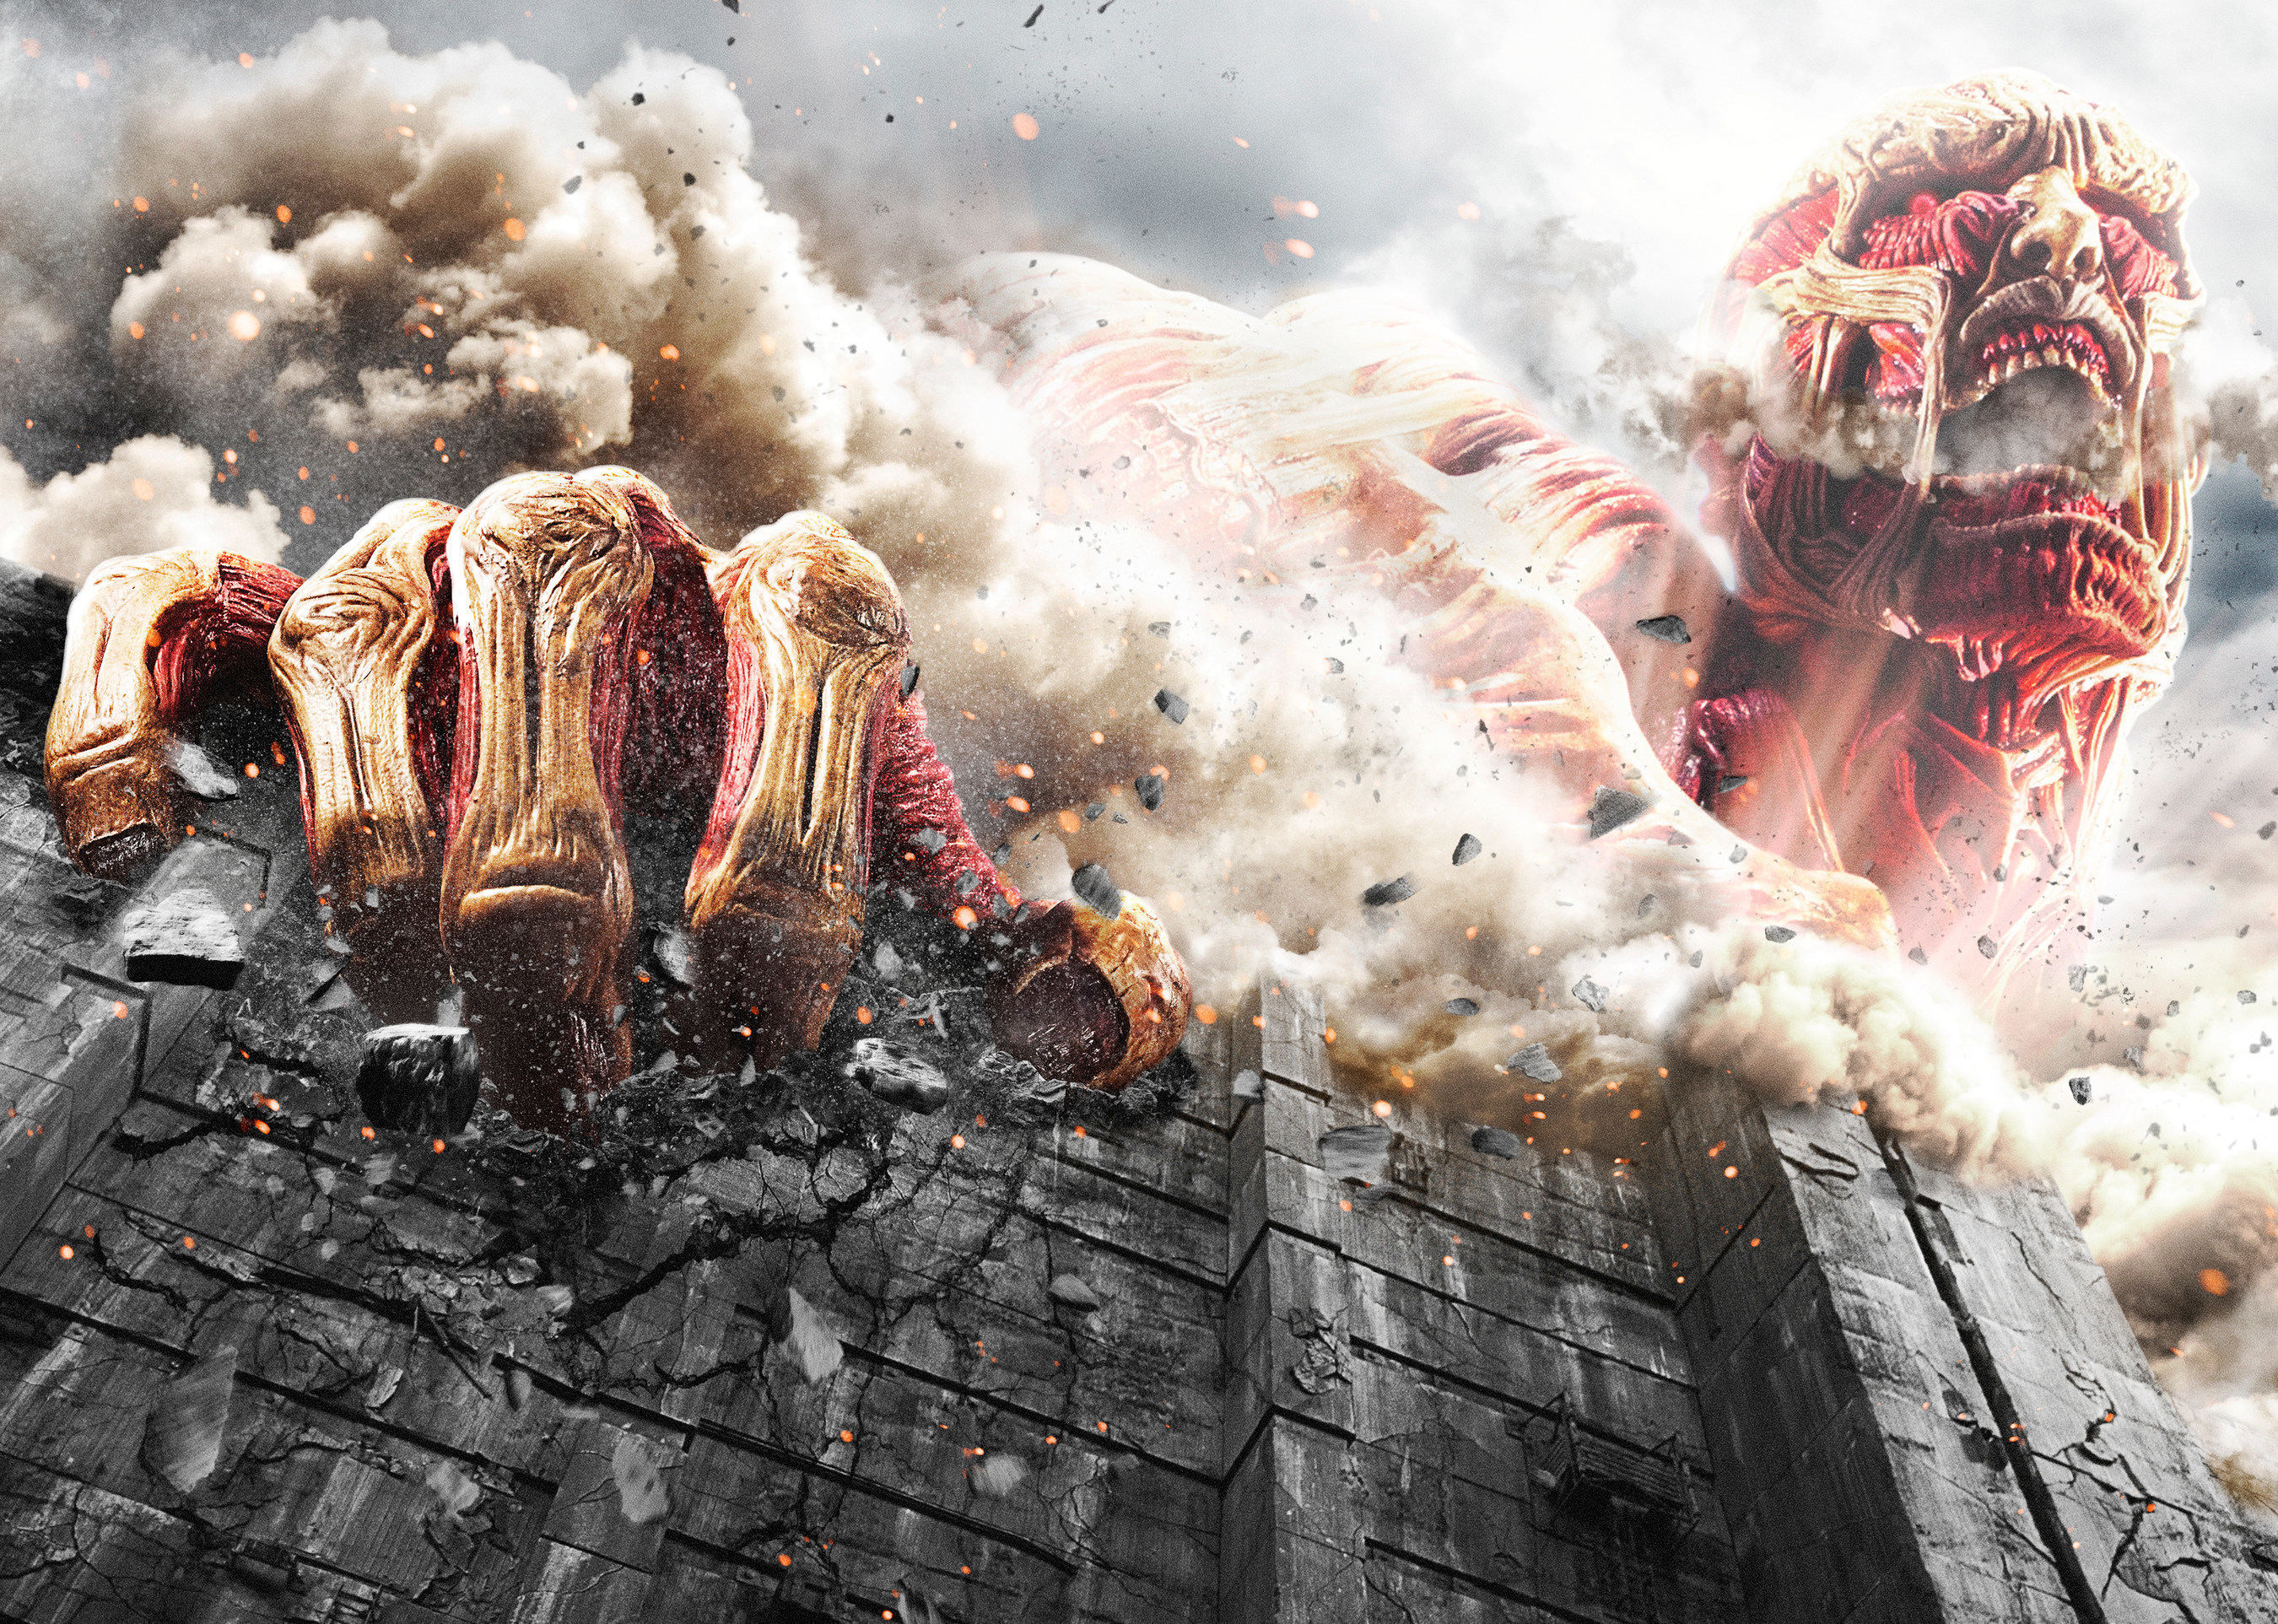 Still from "Attack on Titan" live action movie.